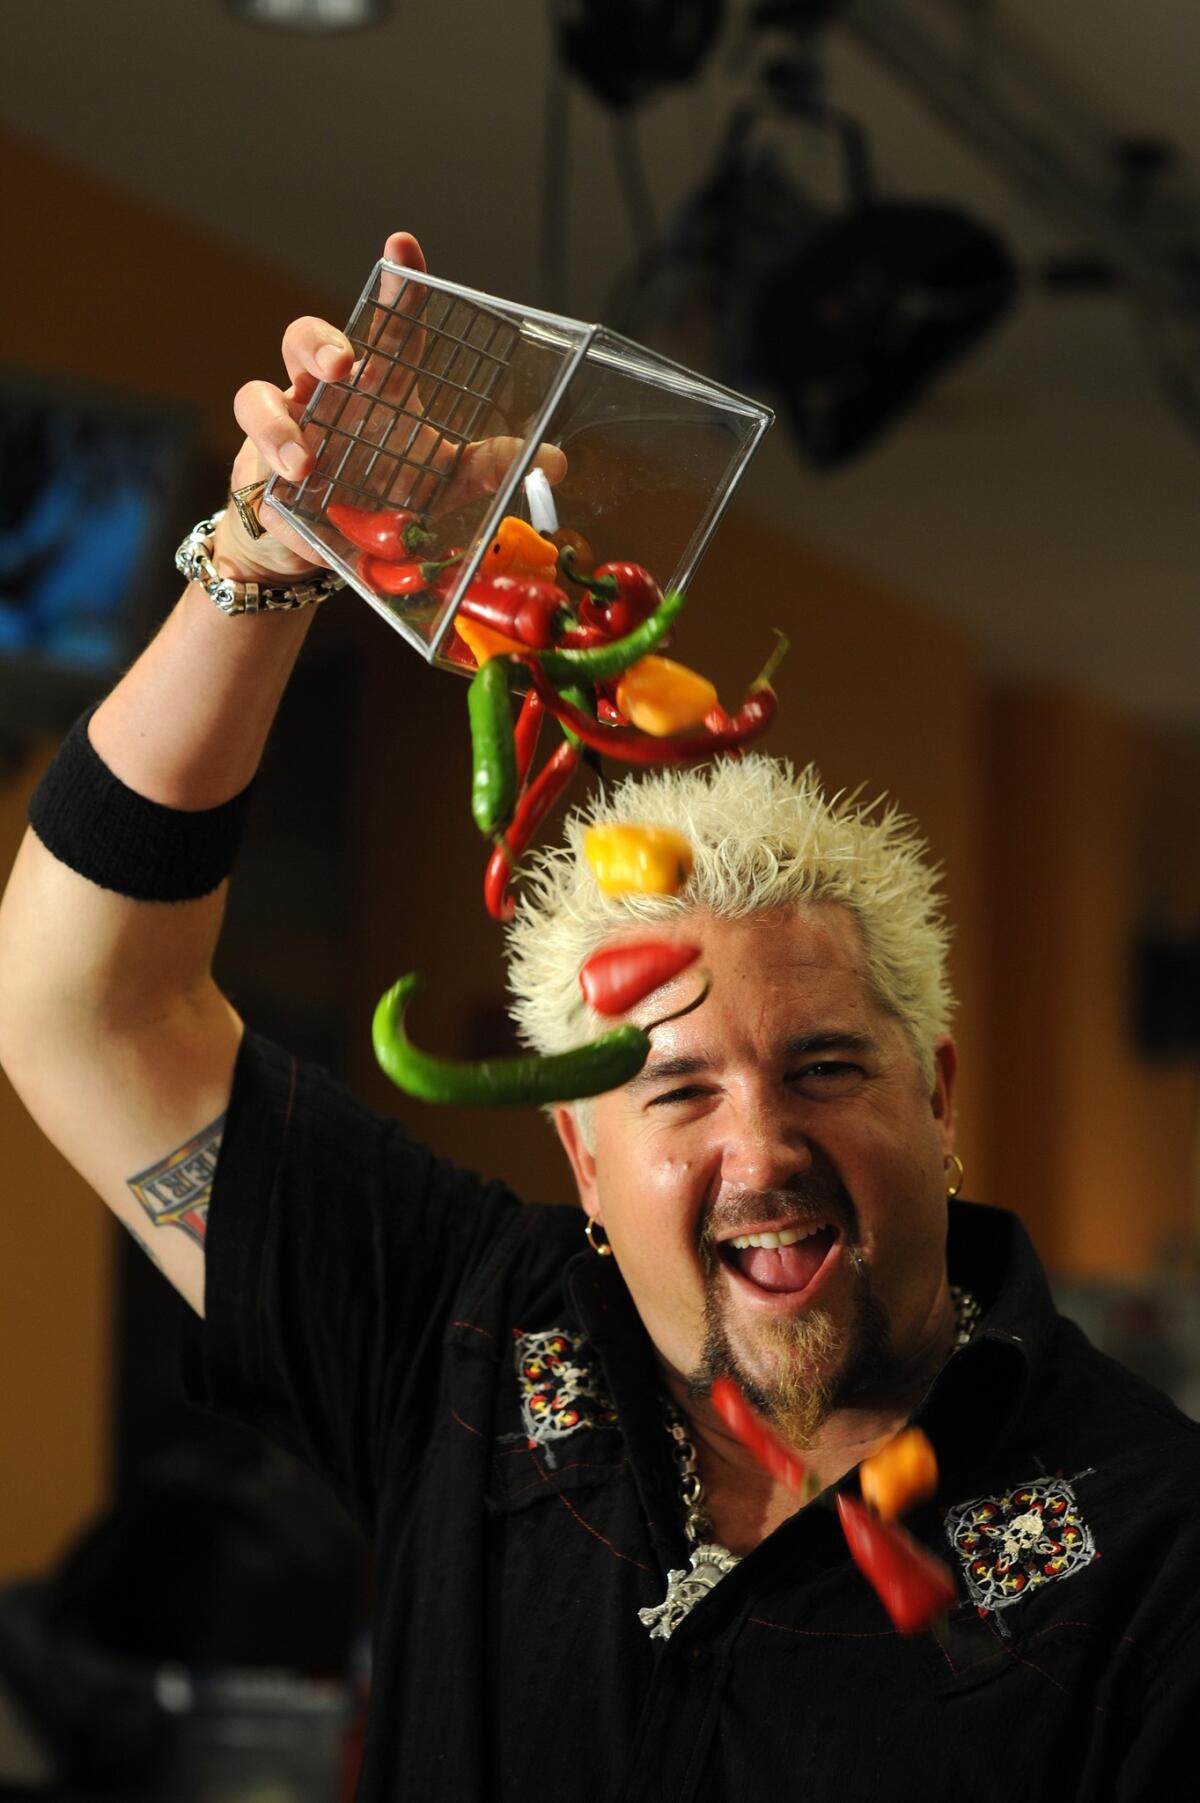 The teenager who stole Guy Fieri's car in 2011 was sentenced to life in prison Thursday.